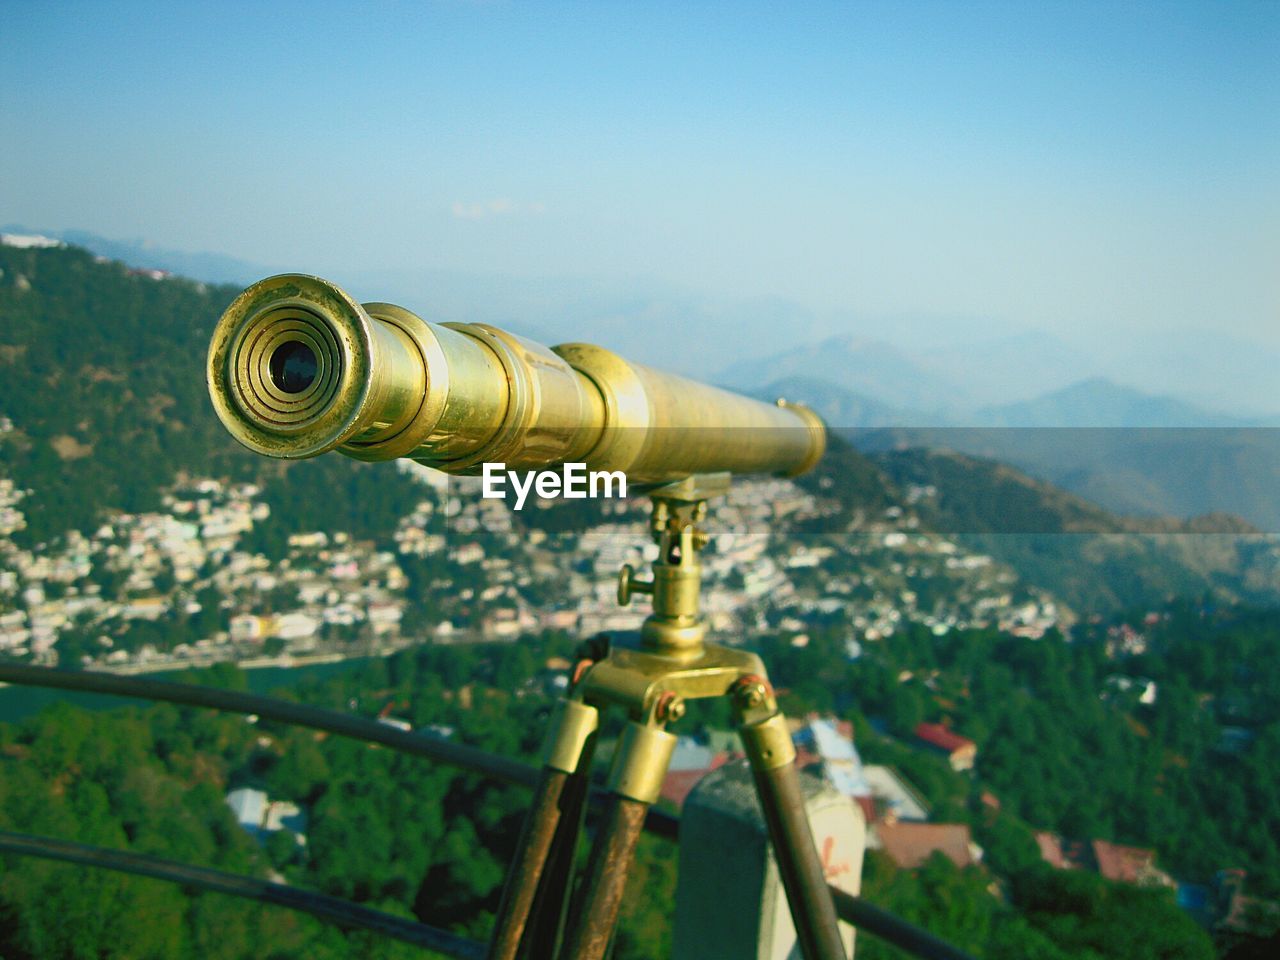 Close-up of old-fashioned metallic binocular over city